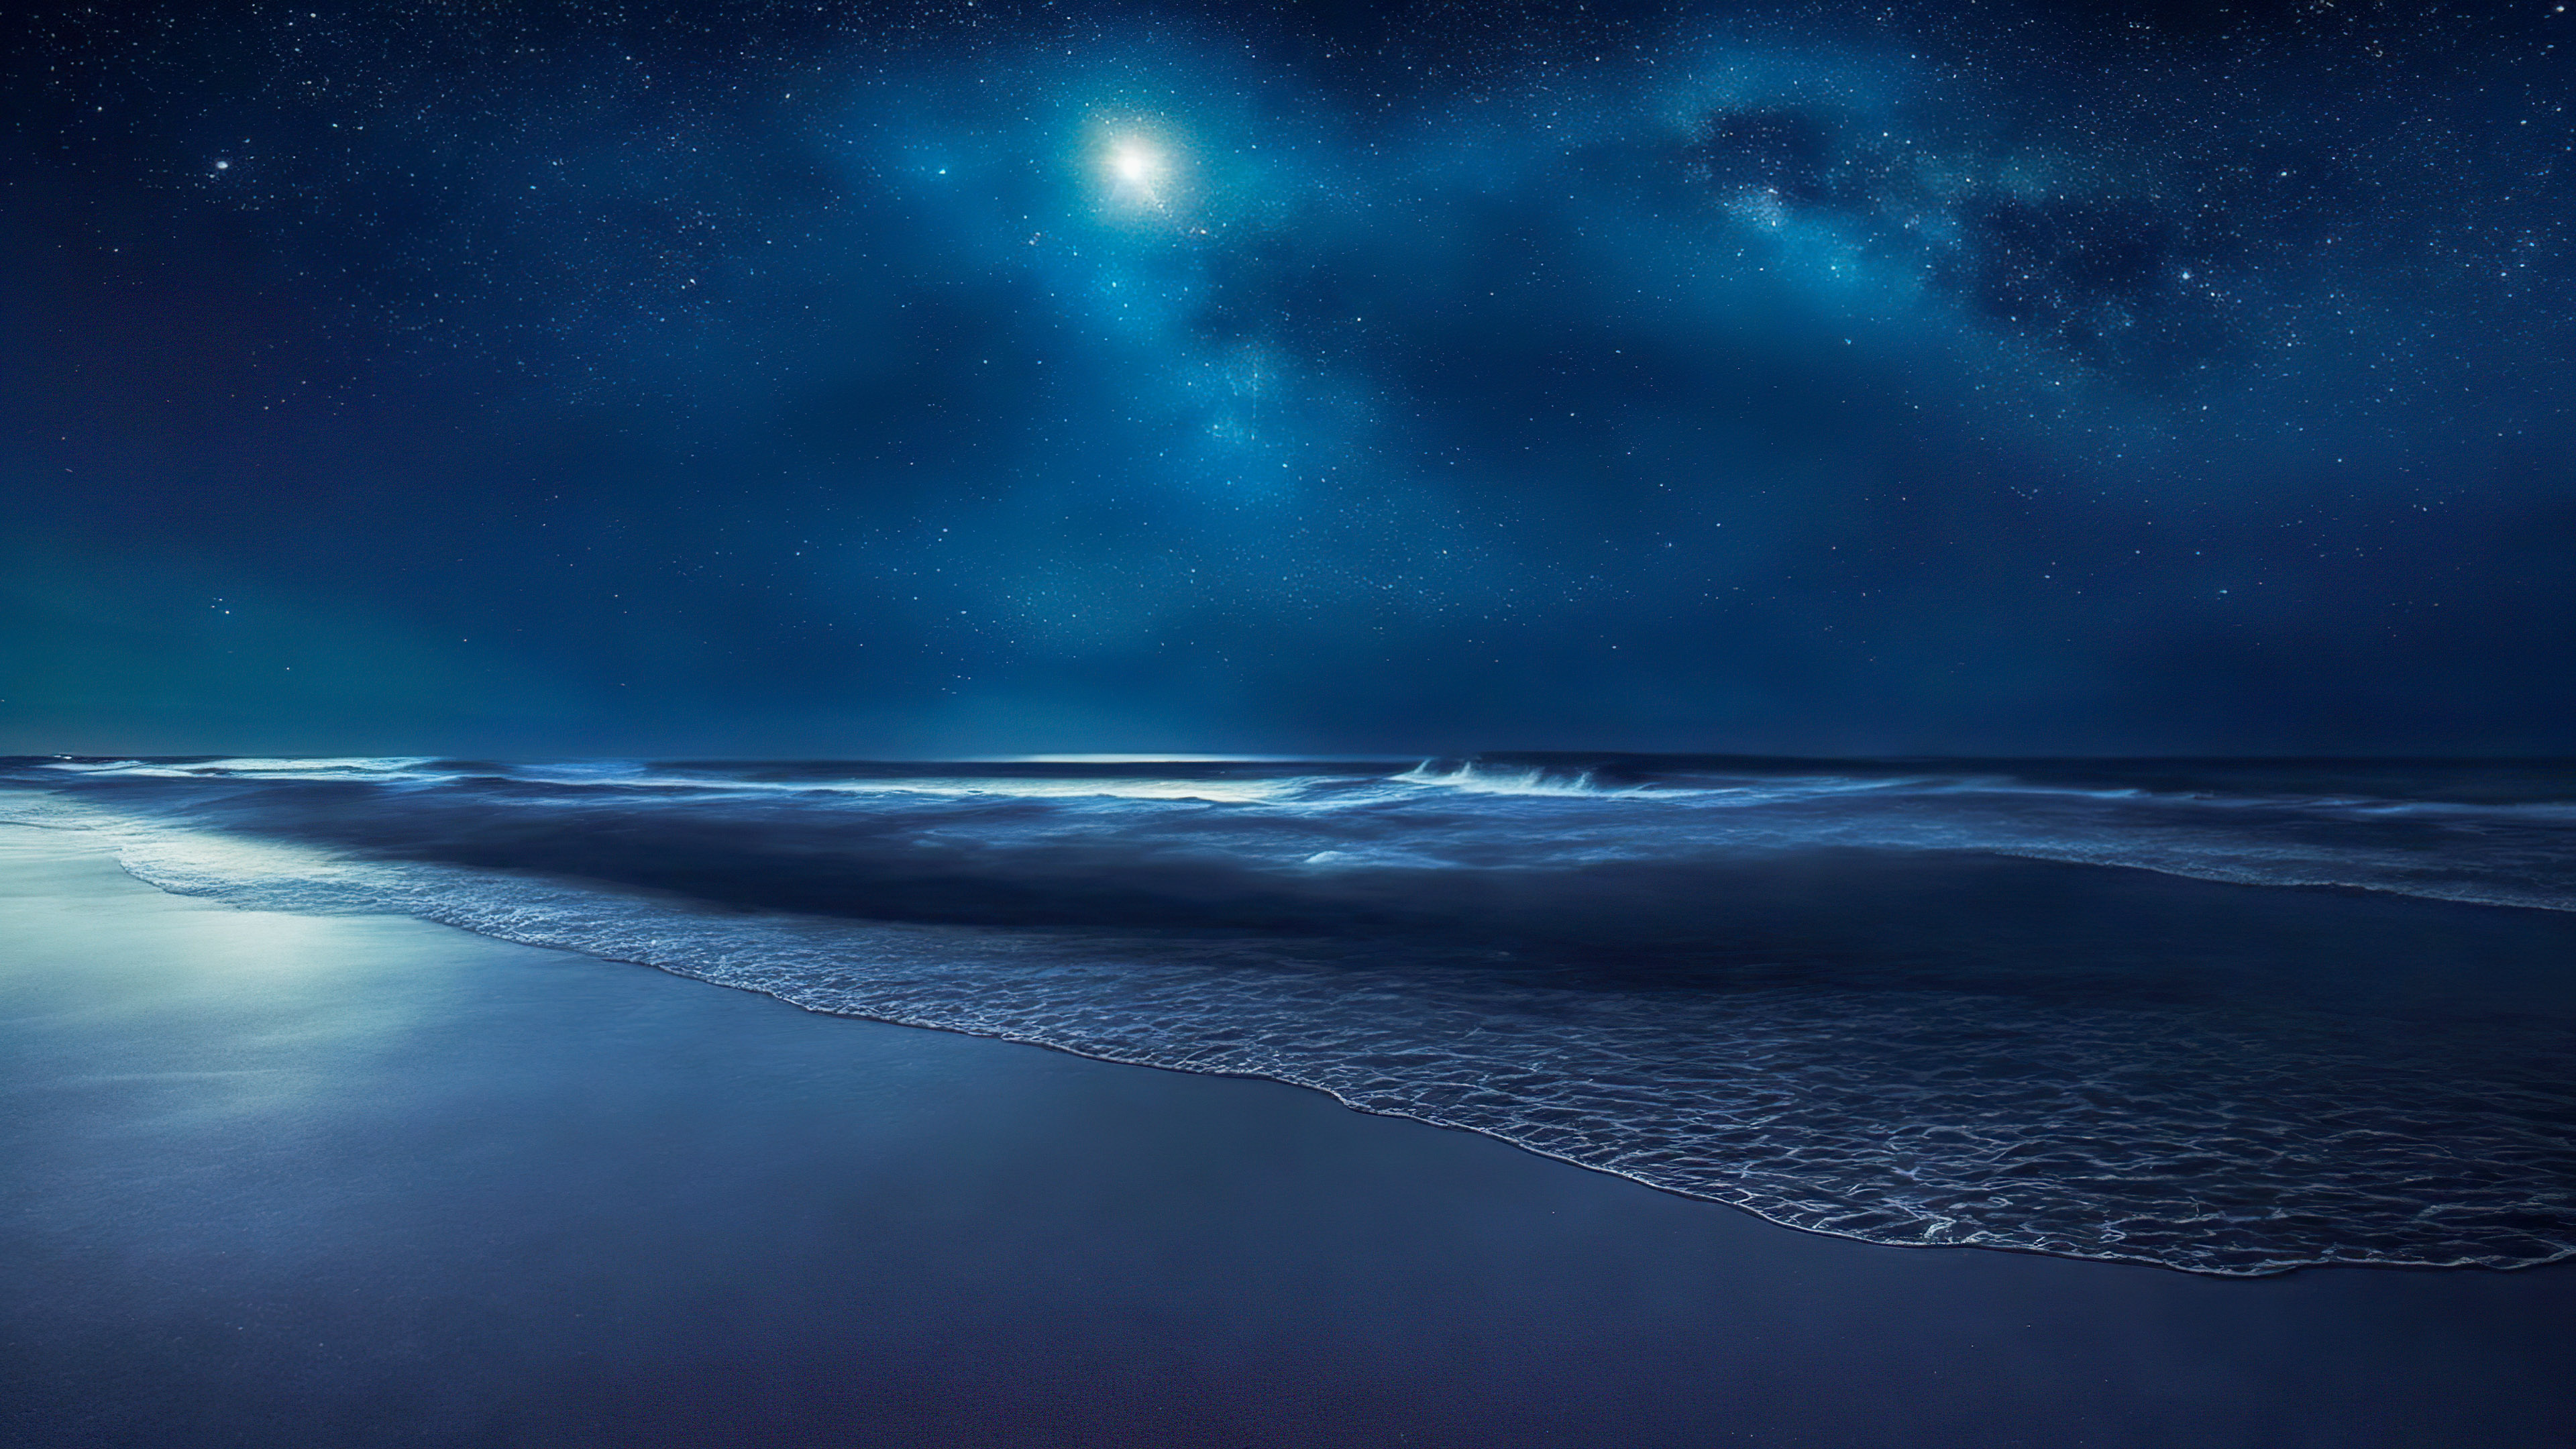 Transform your device’s ambiance with our dark blue sky background, capturing a remote beach at night, where the waves meet the shoreline under a canvas of twinkling stars, and let the serenity wash over you.